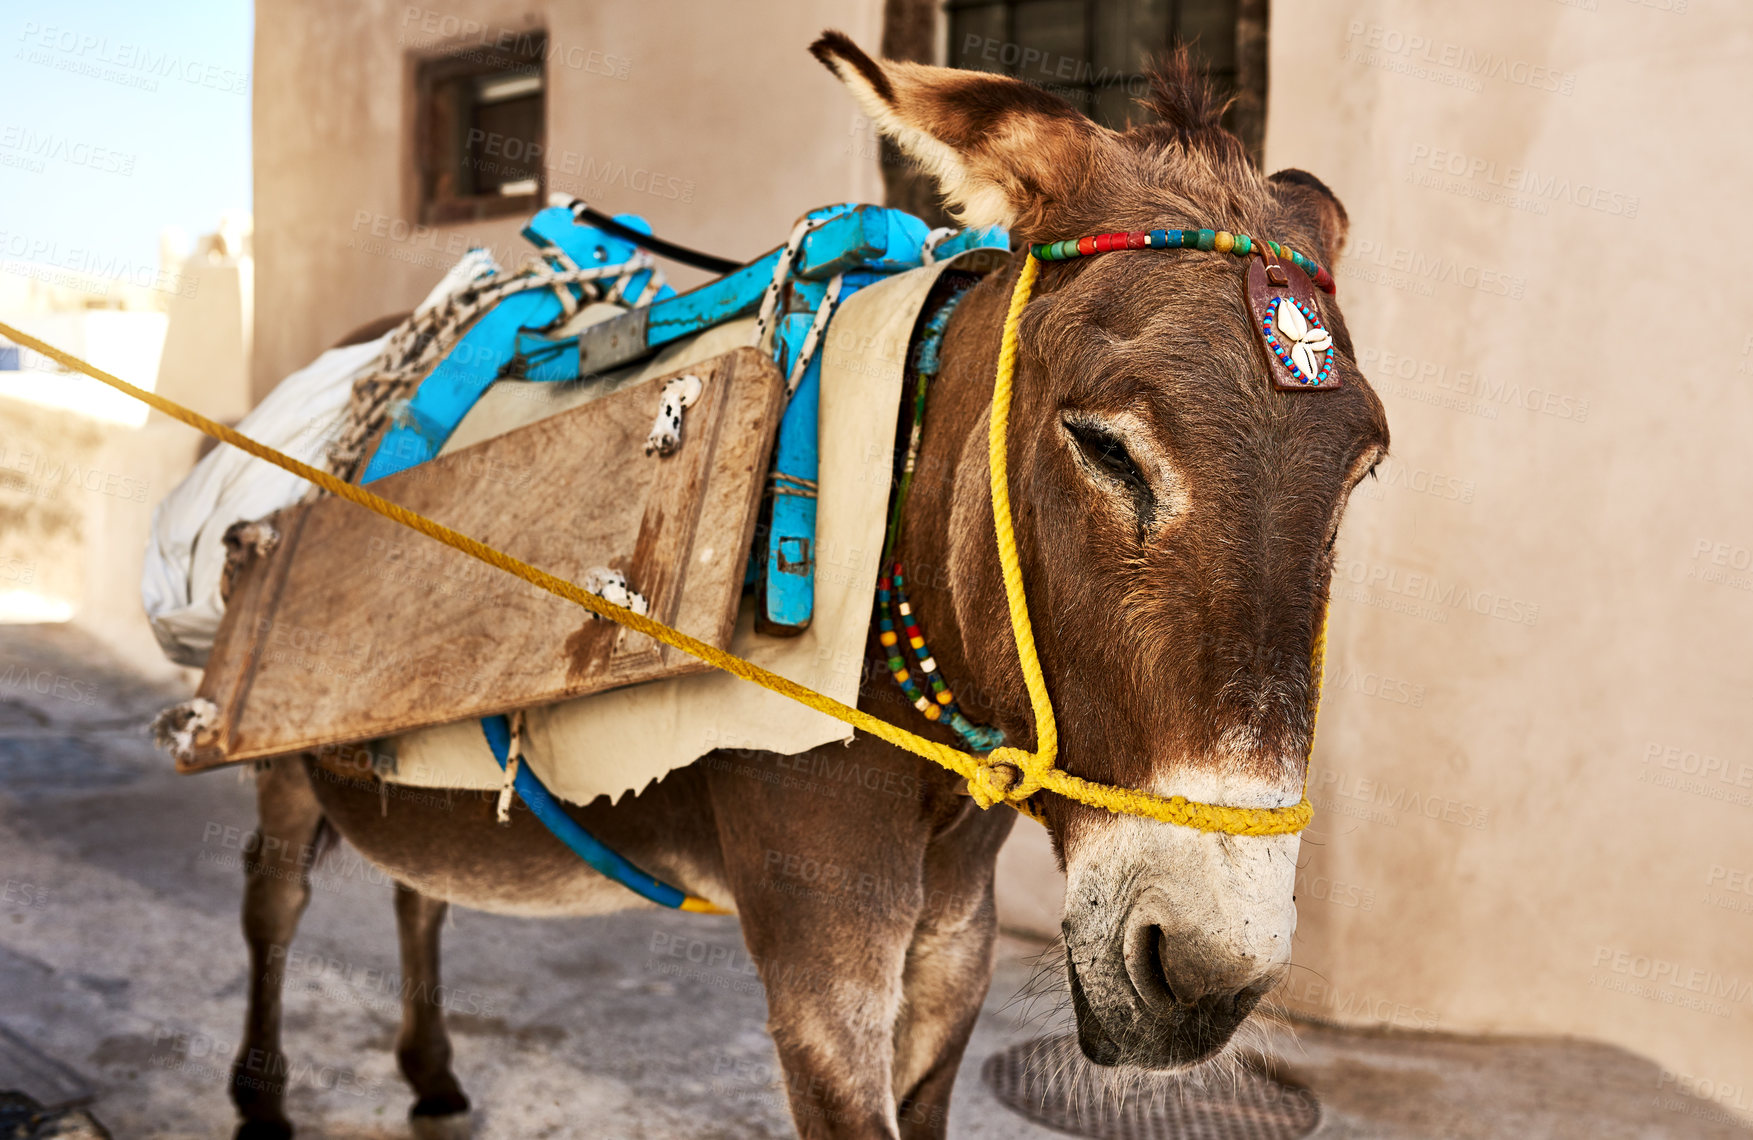 Buy stock photo Shot of a hard working donkey carrying equipment on it's back while walking down a street during the day